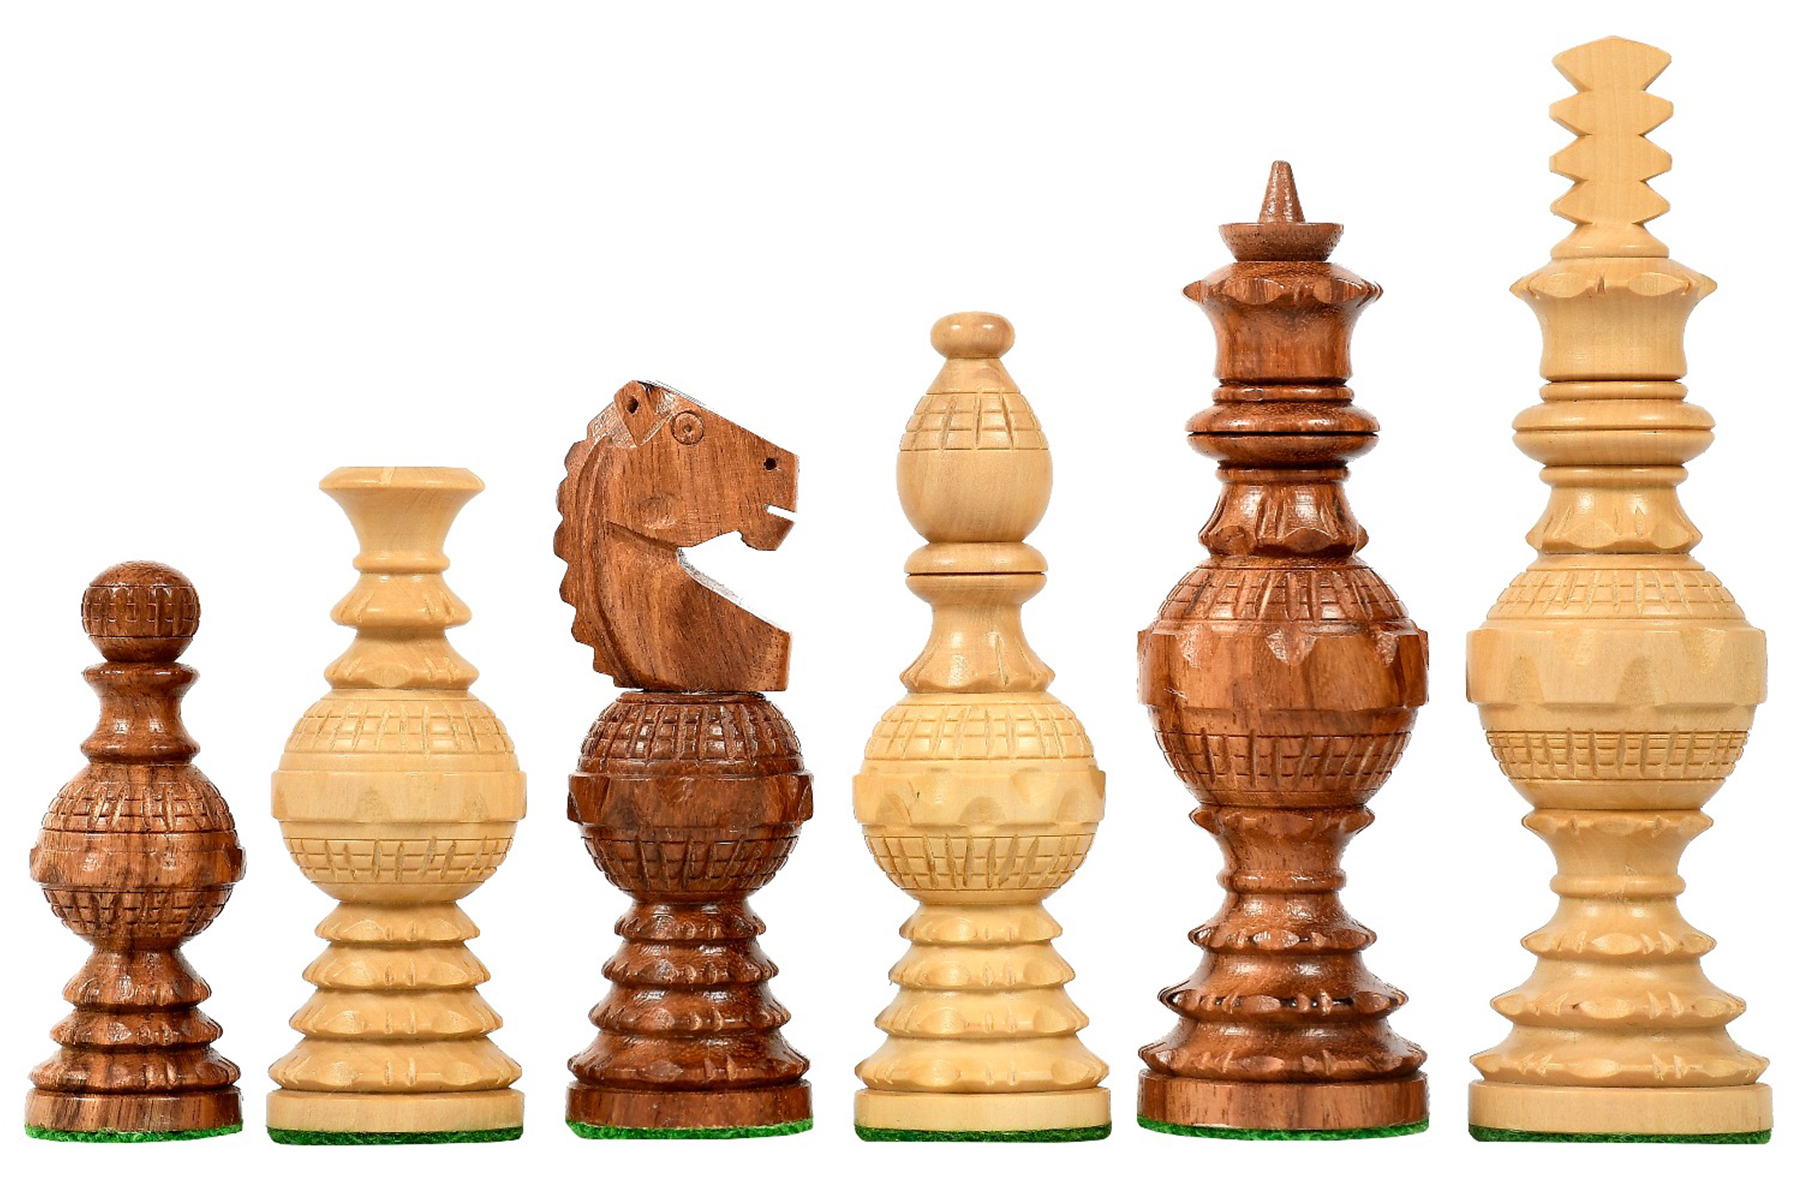 21*21 Inches Indian Handmade Wooden Unique End Grain Border Elevated Super Fine Smooth Polish.Ebony Wood Lacquered Christmas Chess Set.